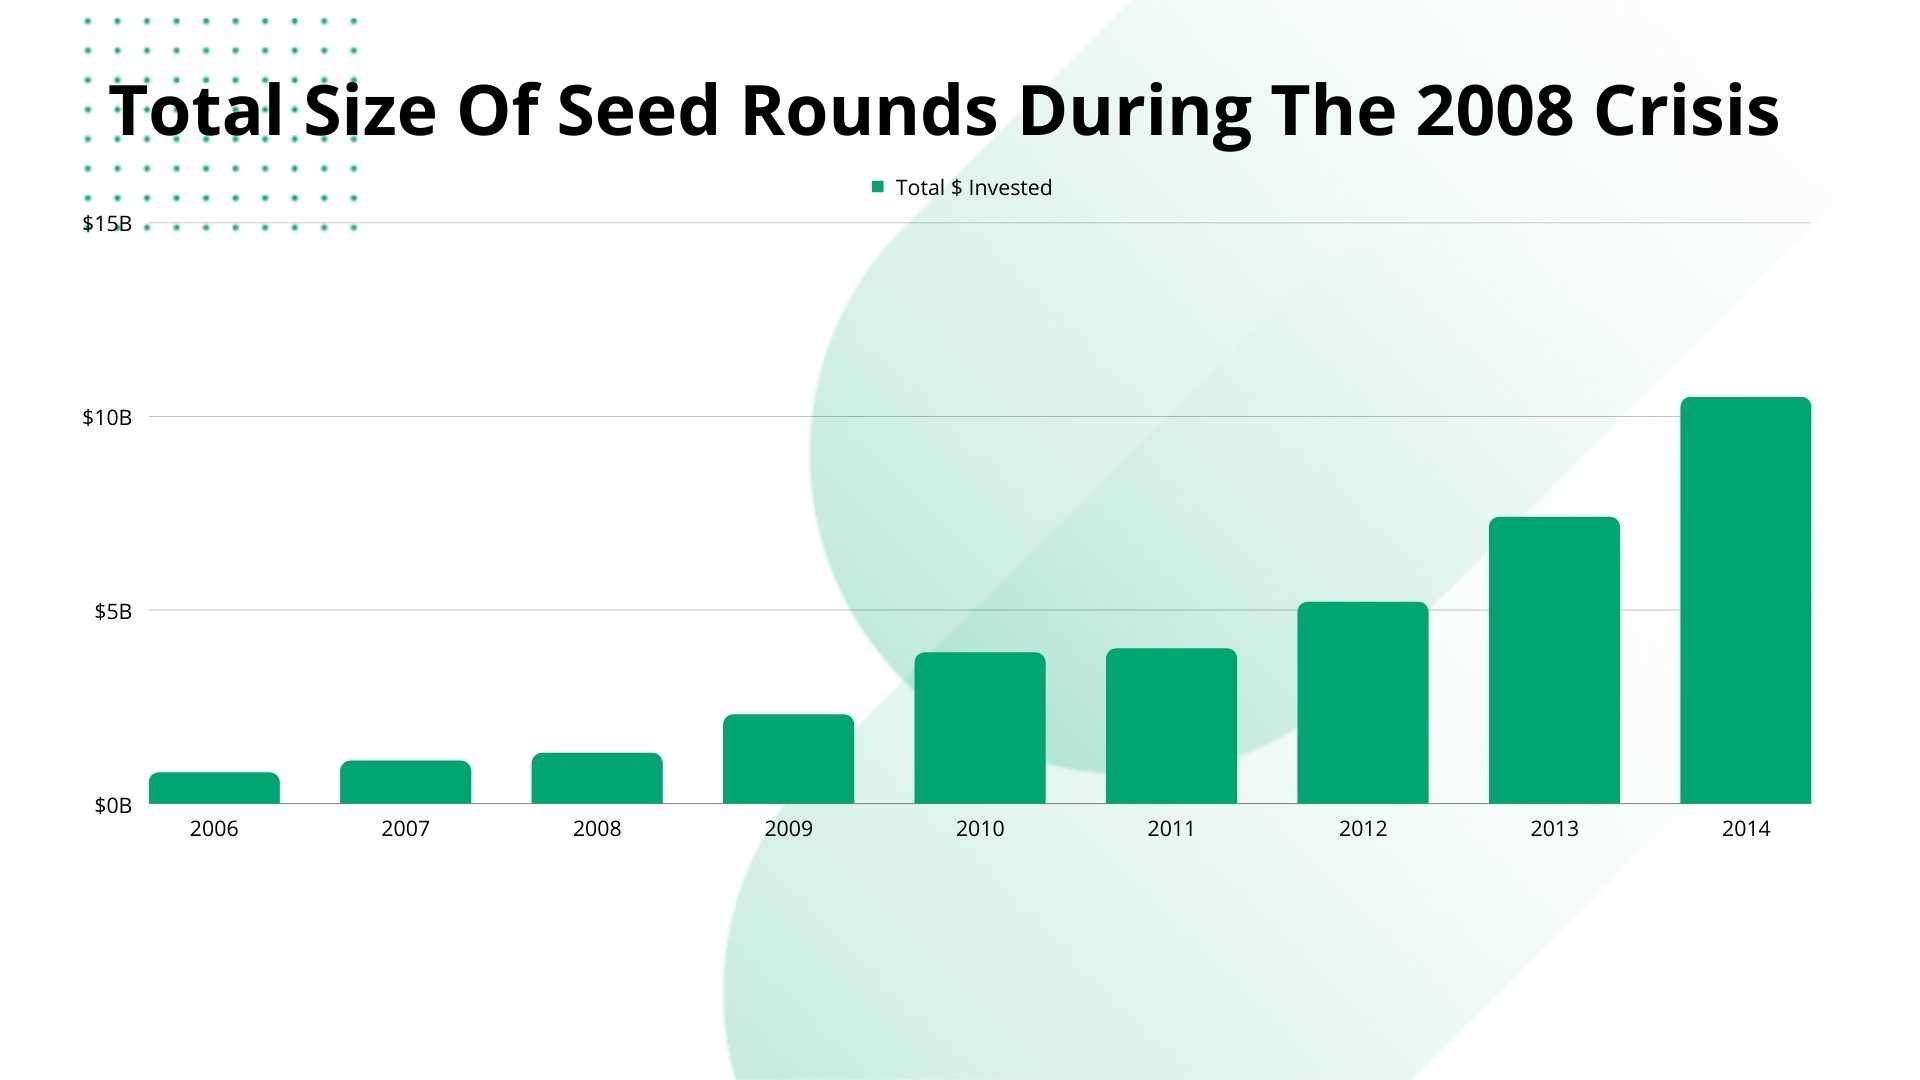 Pre-seed, Seed & Series A Funding: Early-stage funding rounds